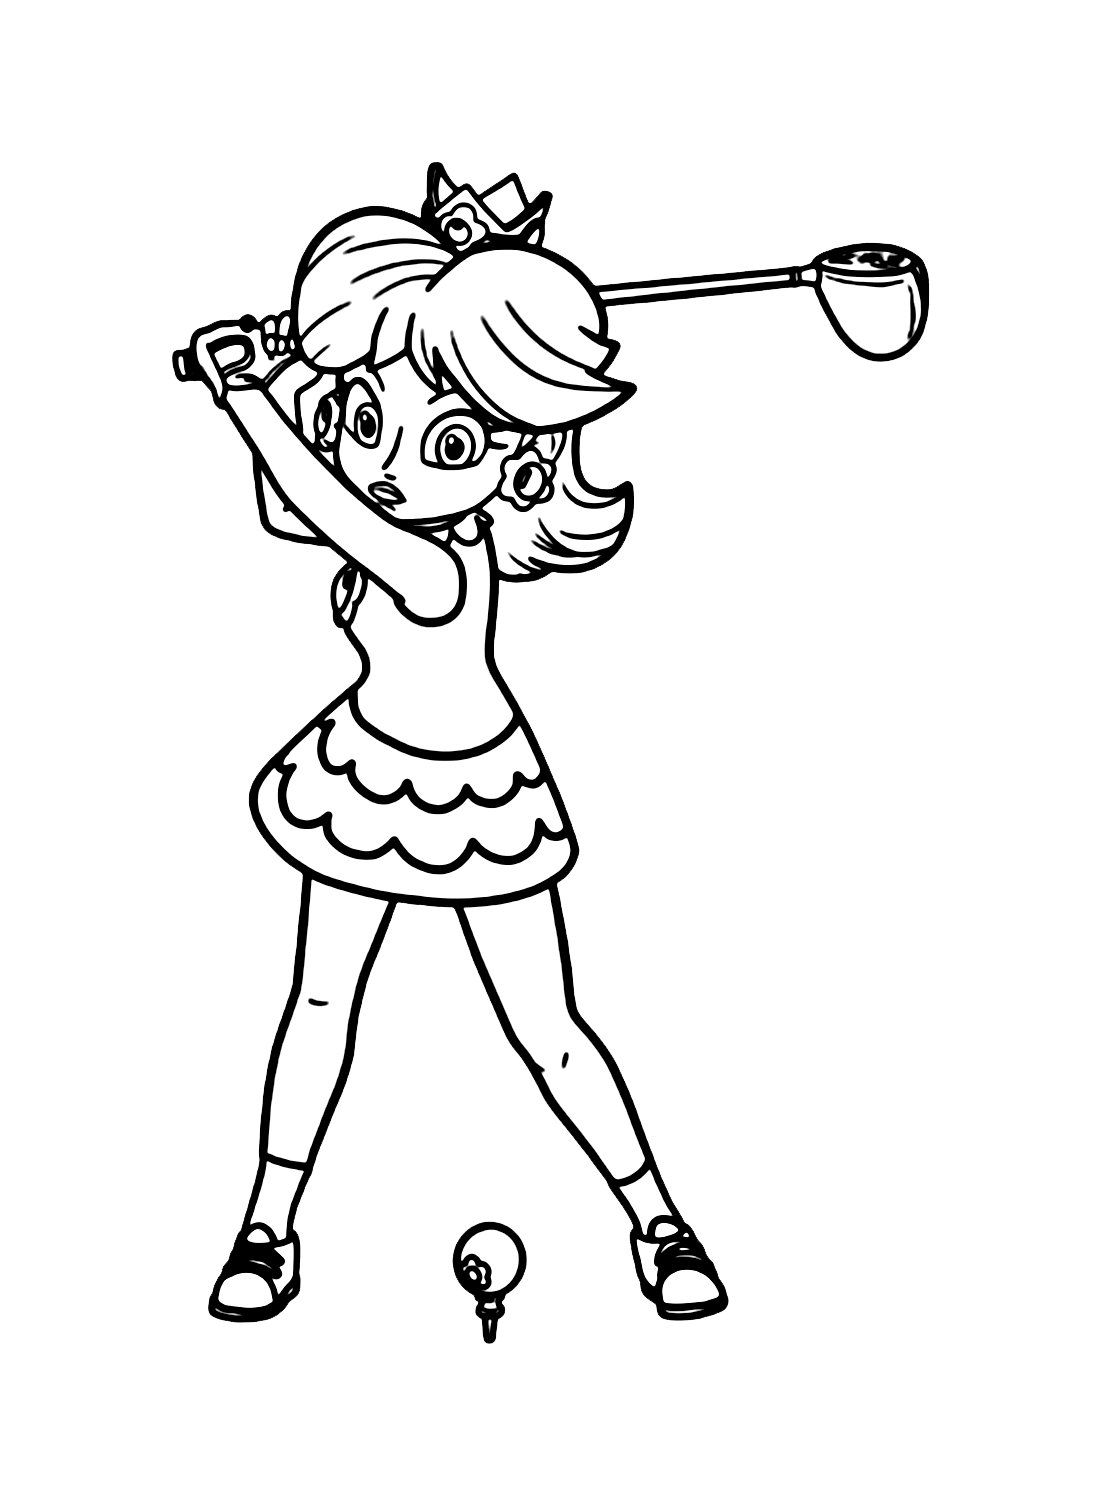 Princess Daisy playing Golf Coloring Pages